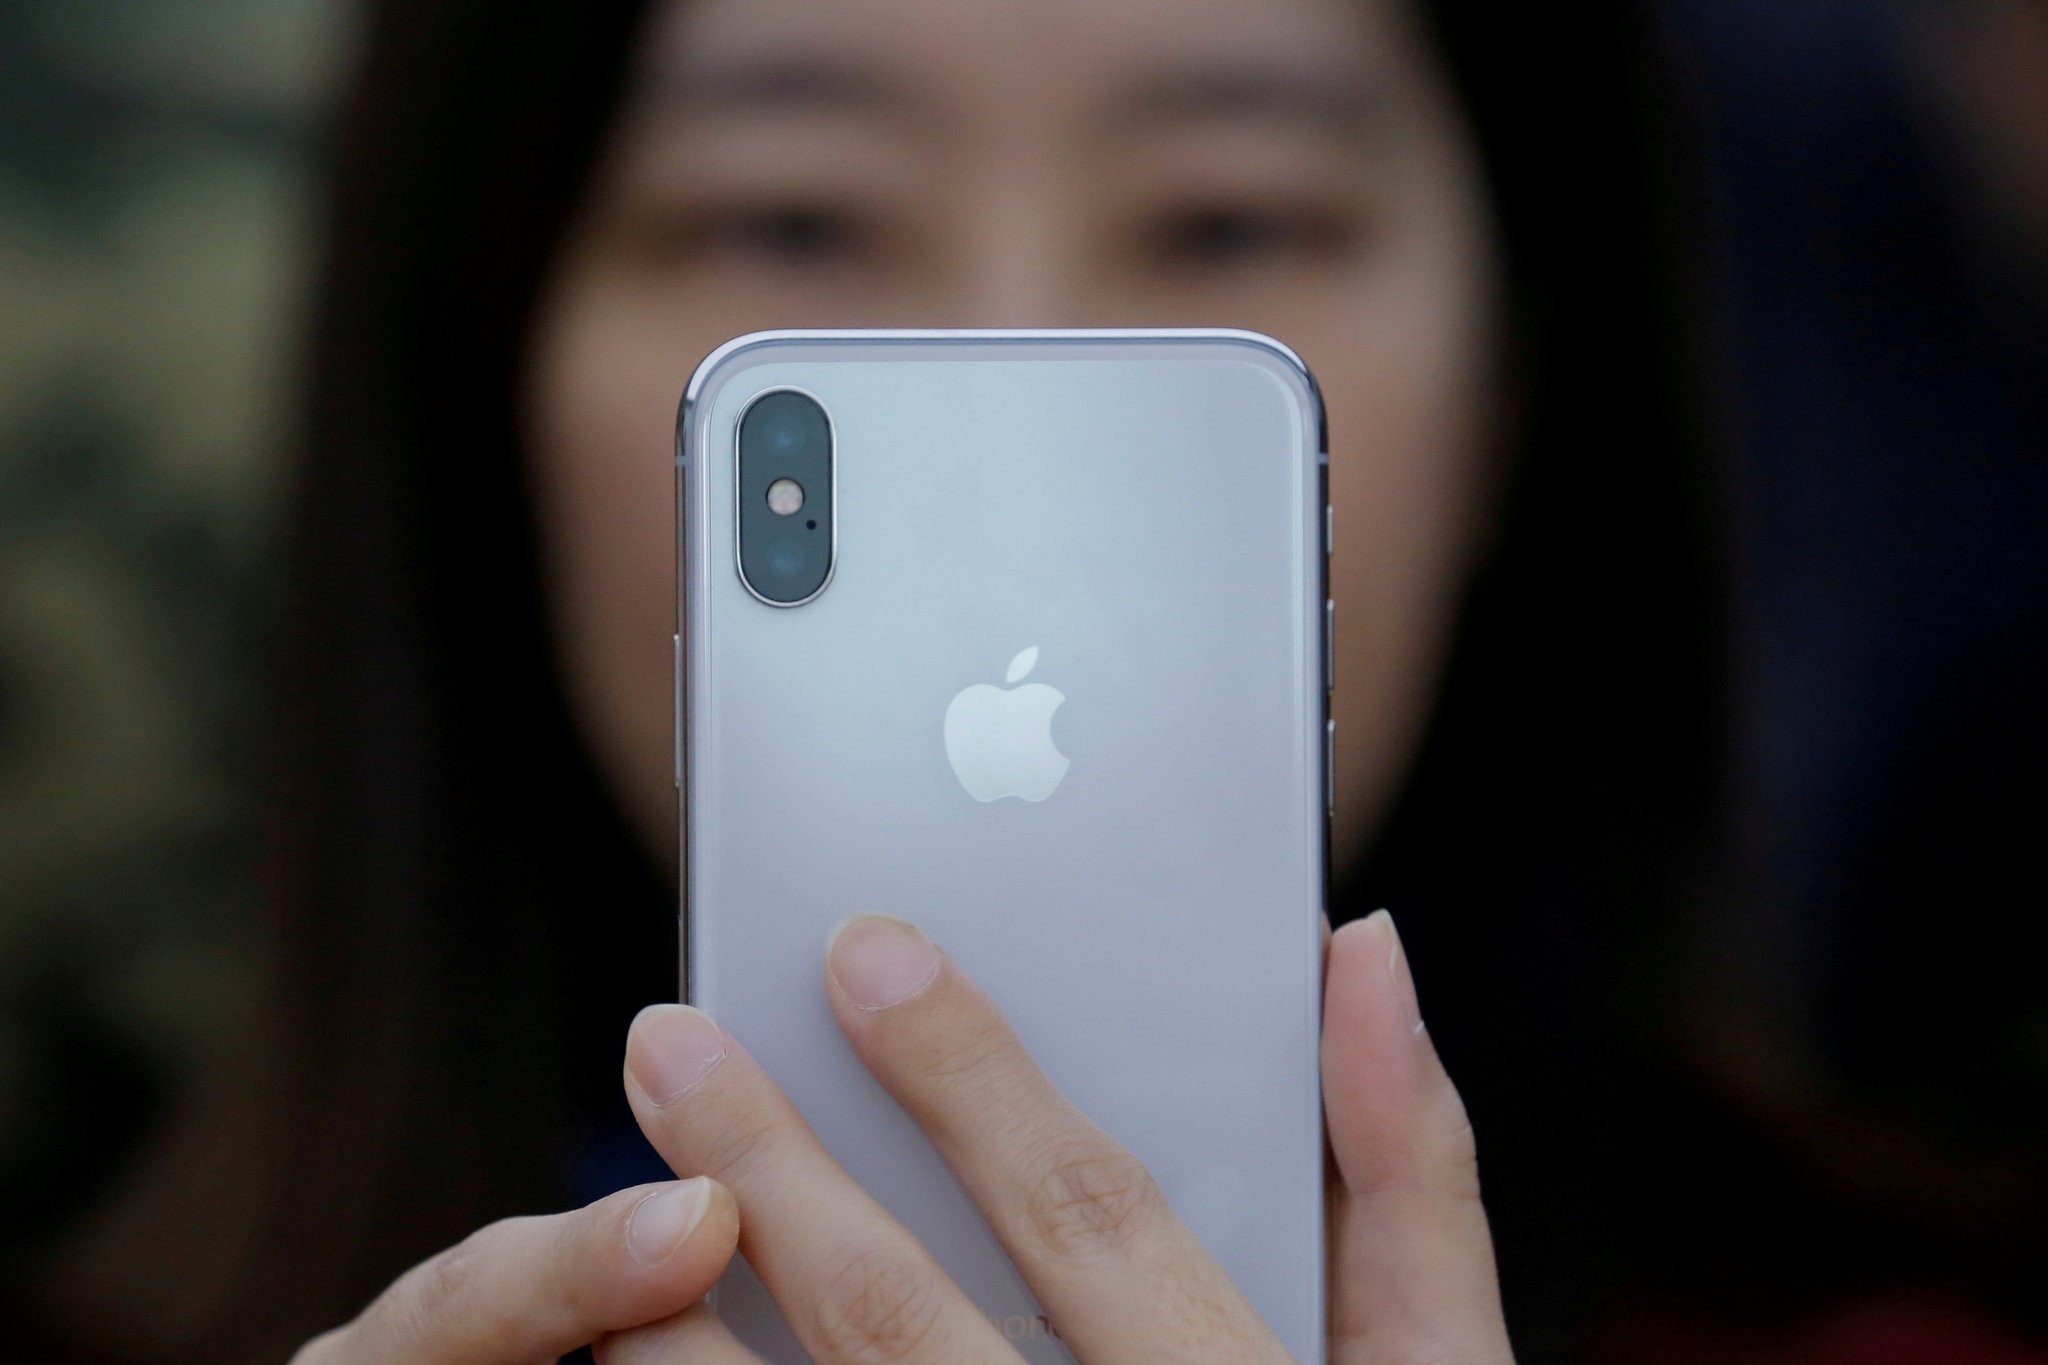 A attendee uses a new iPhone X during a presentation for the media in Beijing, China October 31, 2017. (REUTERS Photo)